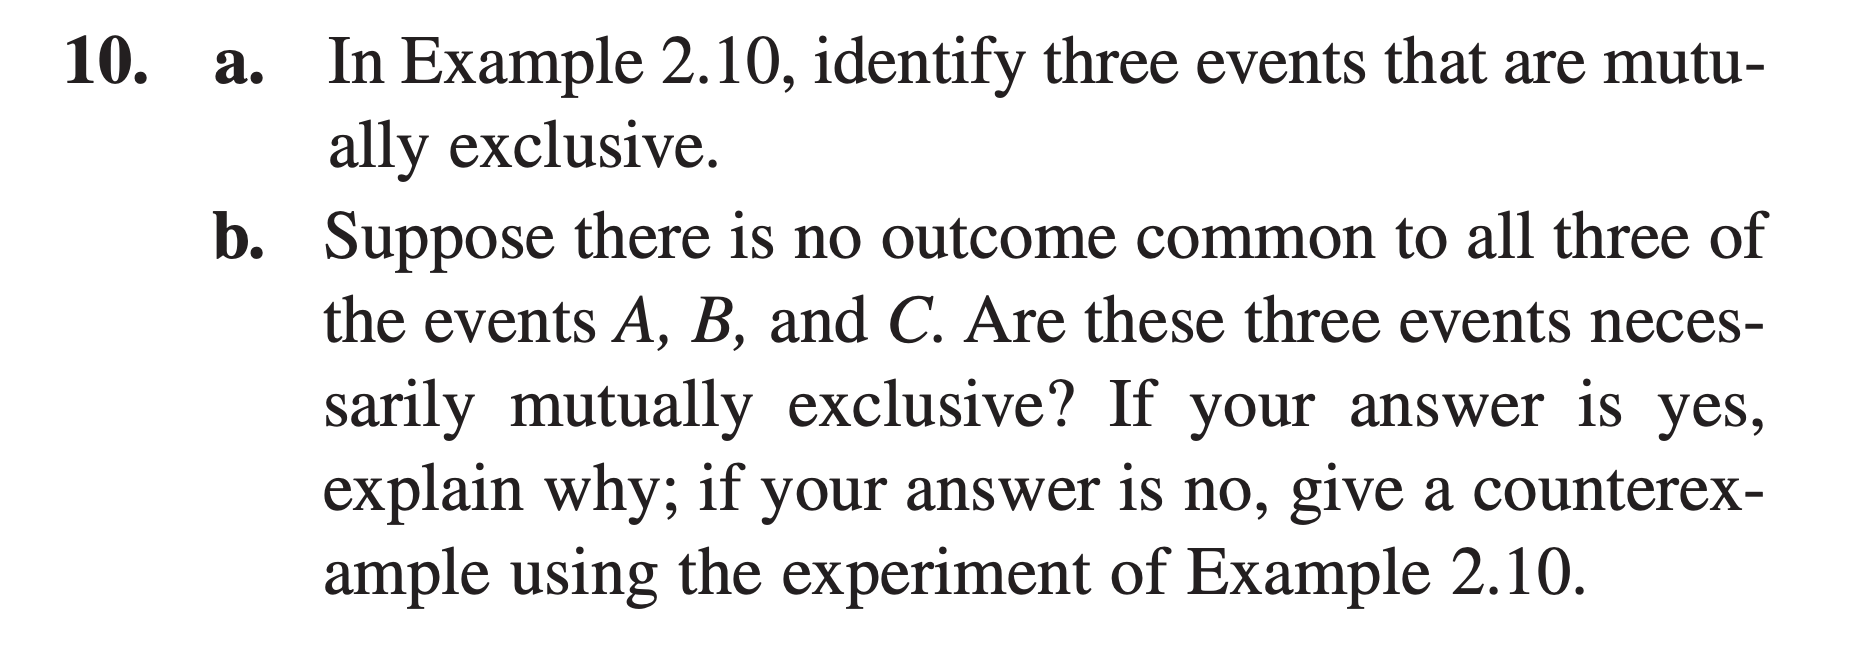 In Example 2.10, identify three events that are mutu-
ally exclusive.
b. Suppose there is no outcome common to all three of
the events A, B, and C. Are these three events neces-
а.
sarily mutually exclusive? If your answer is yes,
explain why; if your answer is no, give a counterex-
ample using the experiment of Example 2.10.
